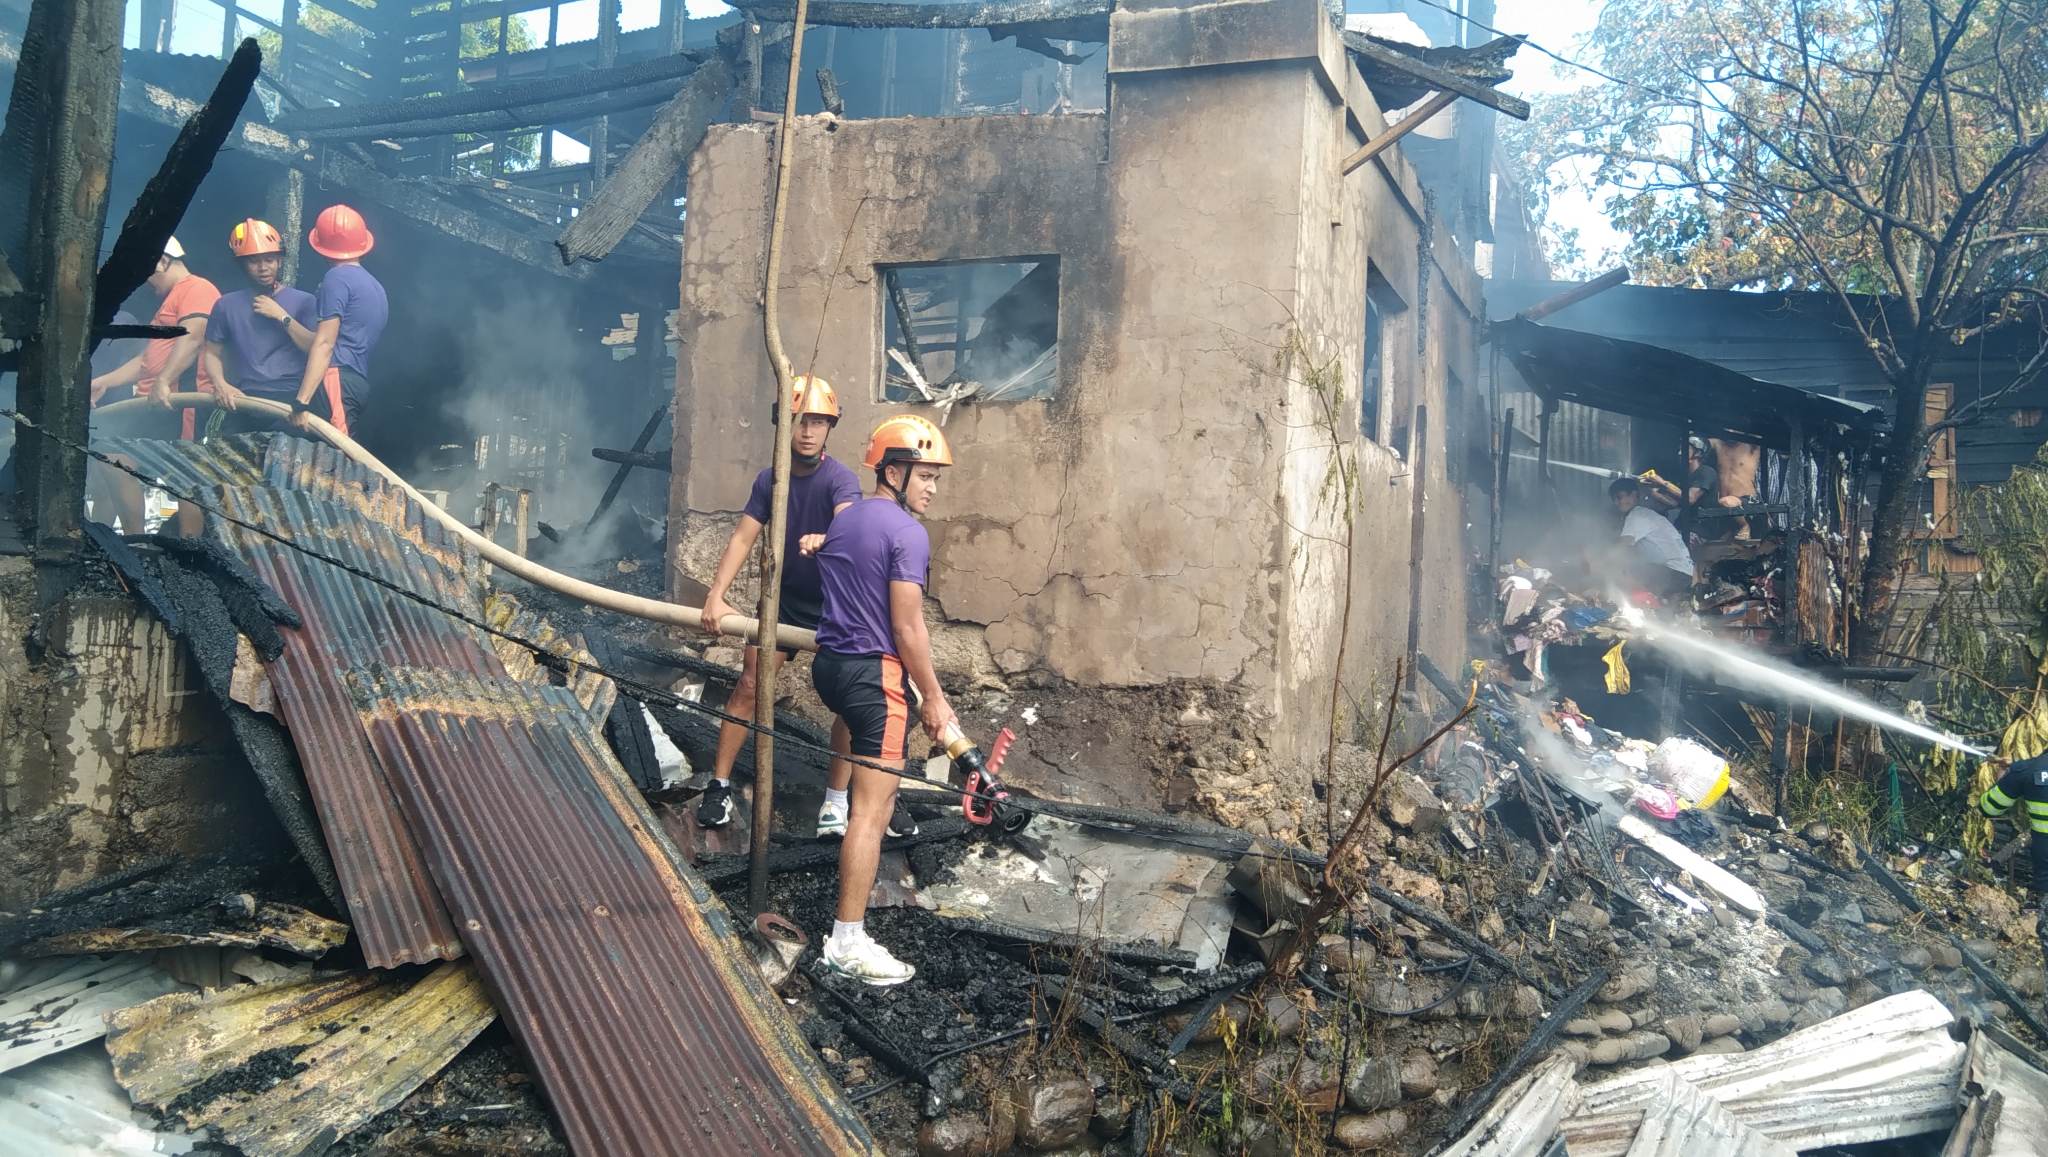 Firemen attempt to douse the fire that hit 20 houses spread between three villages in Puerto Princesa City in Palawan province on Wednesday, March 8